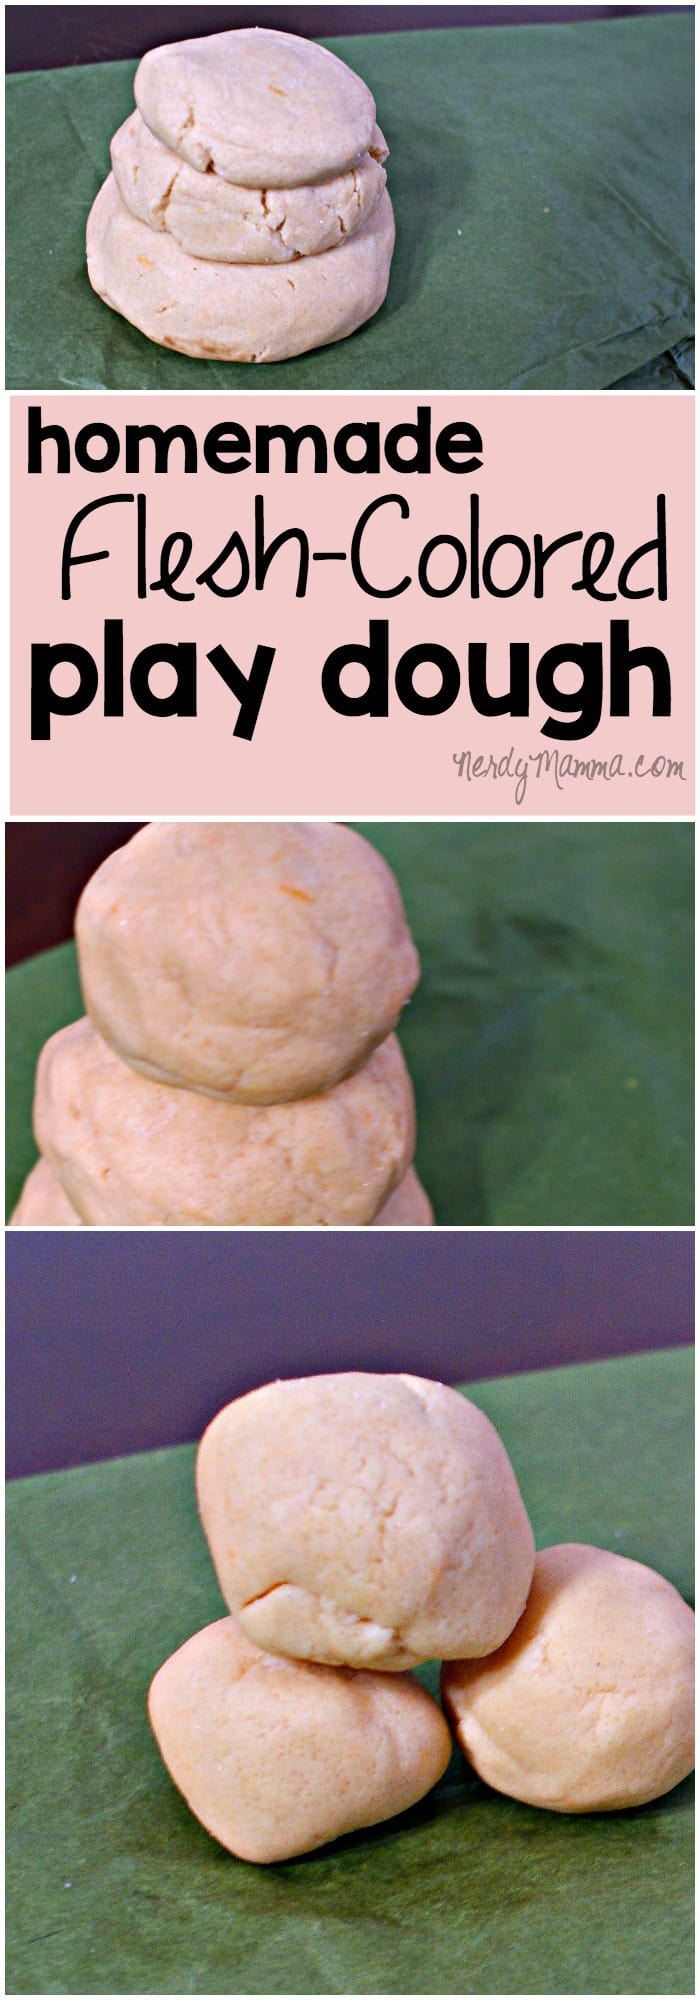 I totally needed this recipe for flesh-colored play dough. Useful for like everything.